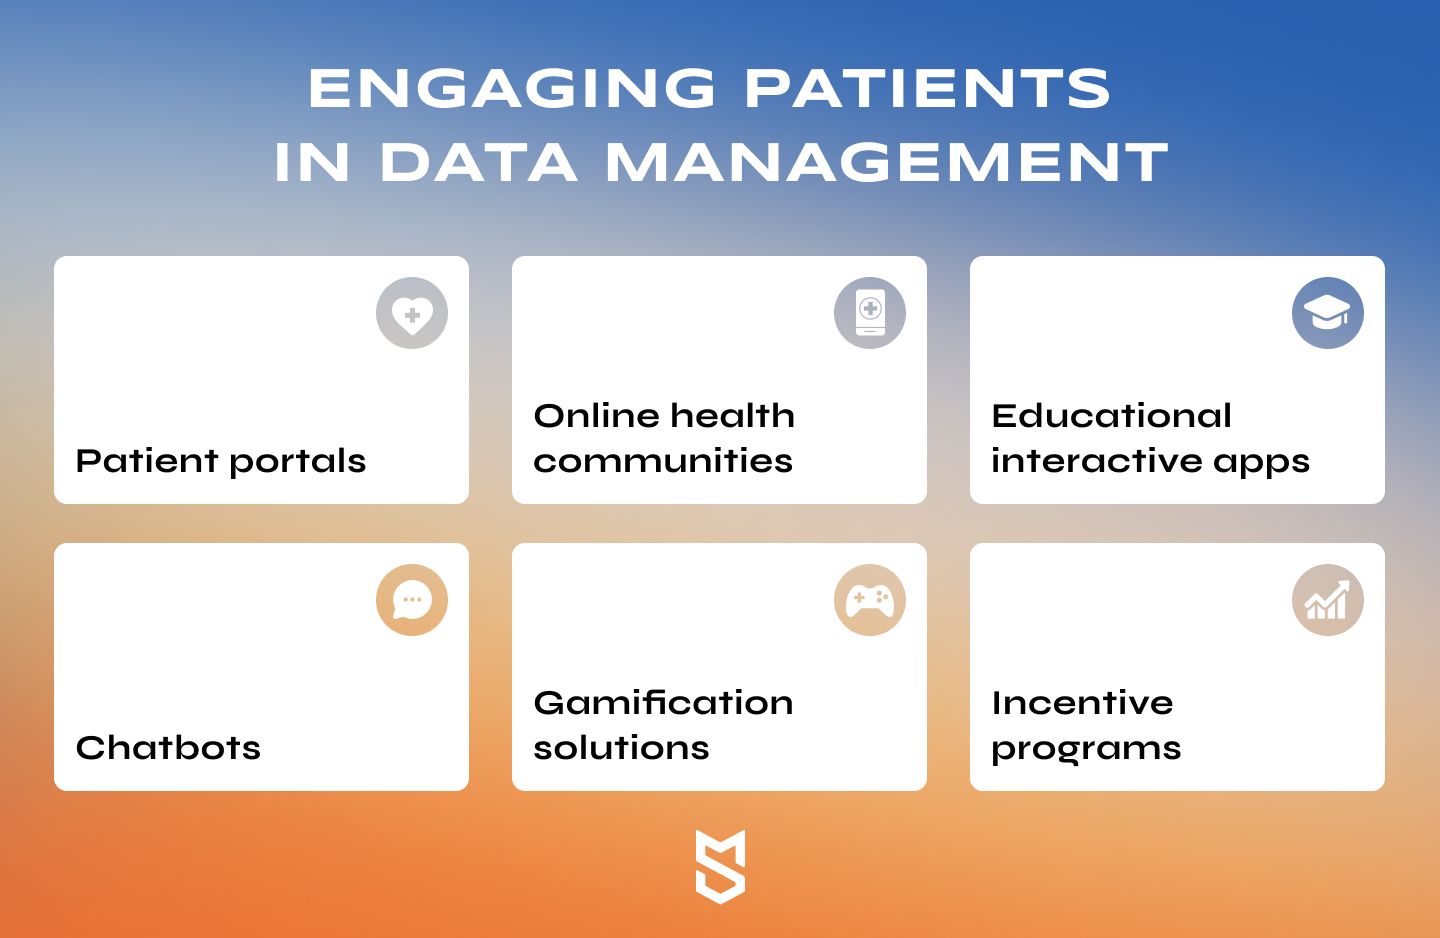 Engaging patients in data management